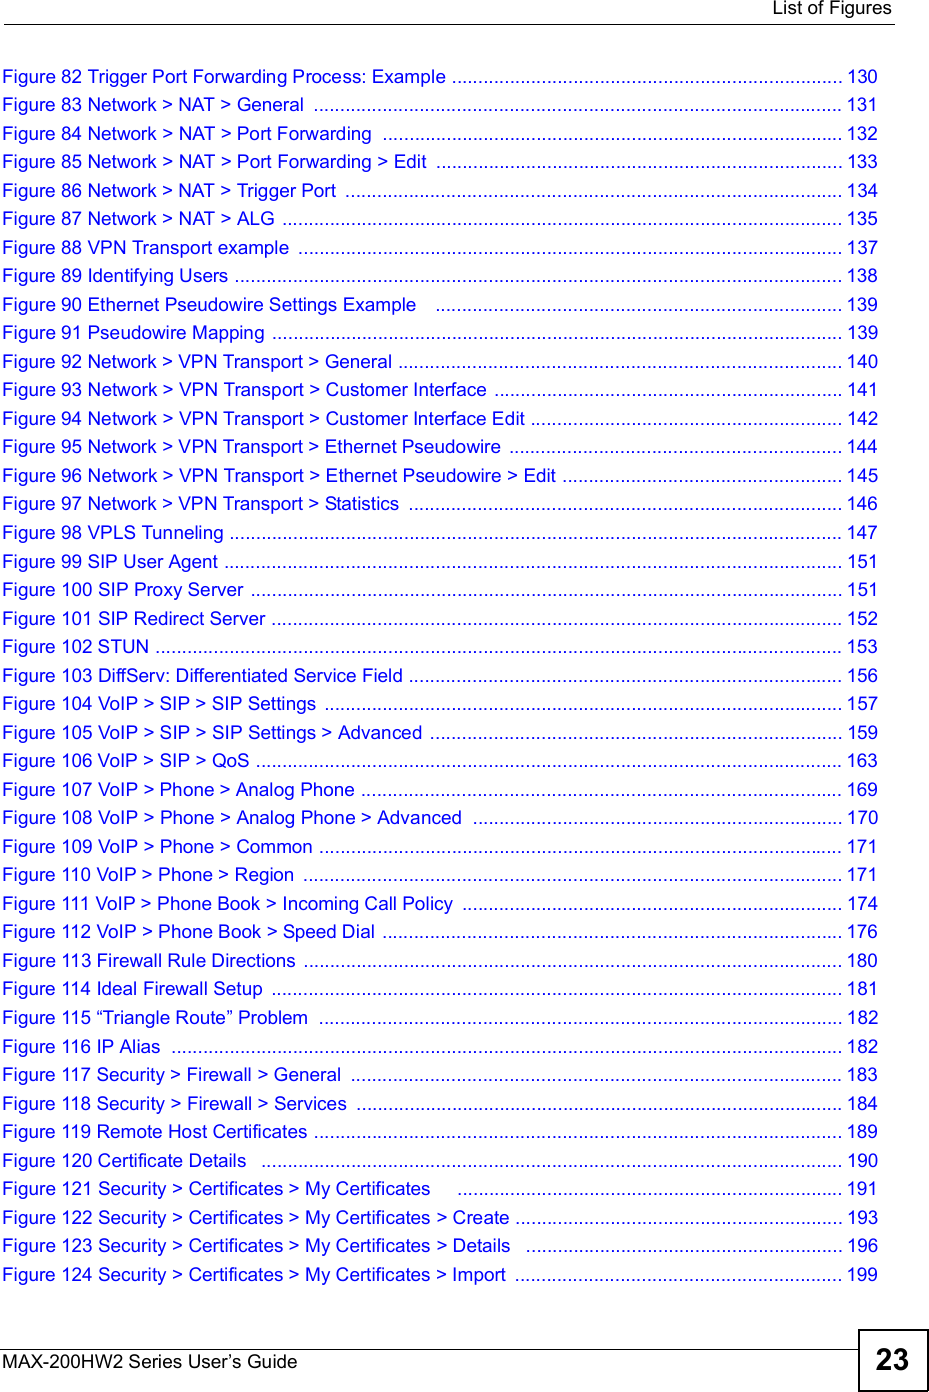  List of FiguresMAX-200HW2 Series User s Guide 23Figure 82 Trigger Port Forwarding Process: Example ..........................................................................130Figure 83 Network &gt; NAT &gt; General ....................................................................................................131Figure 84 Network &gt; NAT &gt; Port Forwarding .......................................................................................132Figure 85 Network &gt; NAT &gt; Port Forwarding &gt; Edit .............................................................................133Figure 86 Network &gt; NAT &gt; Trigger Port ..............................................................................................134Figure 87 Network &gt; NAT &gt; ALG ..........................................................................................................135Figure 88 VPN Transport example .......................................................................................................137Figure 89 Identifying Users ...................................................................................................................138Figure 90 Ethernet Pseudowire Settings Example   .............................................................................139Figure 91 Pseudowire Mapping ............................................................................................................139Figure 92 Network &gt; VPN Transport &gt; General ....................................................................................140Figure 93 Network &gt; VPN Transport &gt; Customer Interface ..................................................................141Figure 94 Network &gt; VPN Transport &gt; Customer Interface Edit ...........................................................142Figure 95 Network &gt; VPN Transport &gt; Ethernet Pseudowire ...............................................................144Figure 96 Network &gt; VPN Transport &gt; Ethernet Pseudowire &gt; Edit .....................................................145Figure 97 Network &gt; VPN Transport &gt; Statistics ..................................................................................146Figure 98 VPLS Tunneling ....................................................................................................................147Figure 99 SIP User Agent .....................................................................................................................151Figure 100 SIP Proxy Server ................................................................................................................151Figure 101 SIP Redirect Server ............................................................................................................152Figure 102 STUN ..................................................................................................................................153Figure 103 DiffServ: Differentiated Service Field ..................................................................................156Figure 104 VoIP &gt; SIP &gt; SIP Settings ..................................................................................................157Figure 105 VoIP &gt; SIP &gt; SIP Settings &gt; Advanced ..............................................................................159Figure 106 VoIP &gt; SIP &gt; QoS ...............................................................................................................163Figure 107 VoIP &gt; Phone &gt; Analog Phone ...........................................................................................169Figure 108 VoIP &gt; Phone &gt; Analog Phone &gt; Advanced ......................................................................170Figure 109 VoIP &gt; Phone &gt; Common ...................................................................................................171Figure 110 VoIP &gt; Phone &gt; Region ......................................................................................................171Figure 111 VoIP &gt; Phone Book &gt; Incoming Call Policy ........................................................................174Figure 112 VoIP &gt; Phone Book &gt; Speed Dial .......................................................................................176Figure 113 Firewall Rule Directions ......................................................................................................180Figure 114 Ideal Firewall Setup ............................................................................................................181Figure 115 !Triangle Route&quot; Problem ...................................................................................................182Figure 116 IP Alias ...............................................................................................................................182Figure 117 Security &gt; Firewall &gt; General .............................................................................................183Figure 118 Security &gt; Firewall &gt; Services ............................................................................................184Figure 119 Remote Host Certificates ....................................................................................................189Figure 120 Certificate Details  ..............................................................................................................190Figure 121 Security &gt; Certificates &gt; My Certificates    .........................................................................191Figure 122 Security &gt; Certificates &gt; My Certificates &gt; Create ..............................................................193Figure 123 Security &gt; Certificates &gt; My Certificates &gt; Details  ............................................................196Figure 124 Security &gt; Certificates &gt; My Certificates &gt; Import ..............................................................199